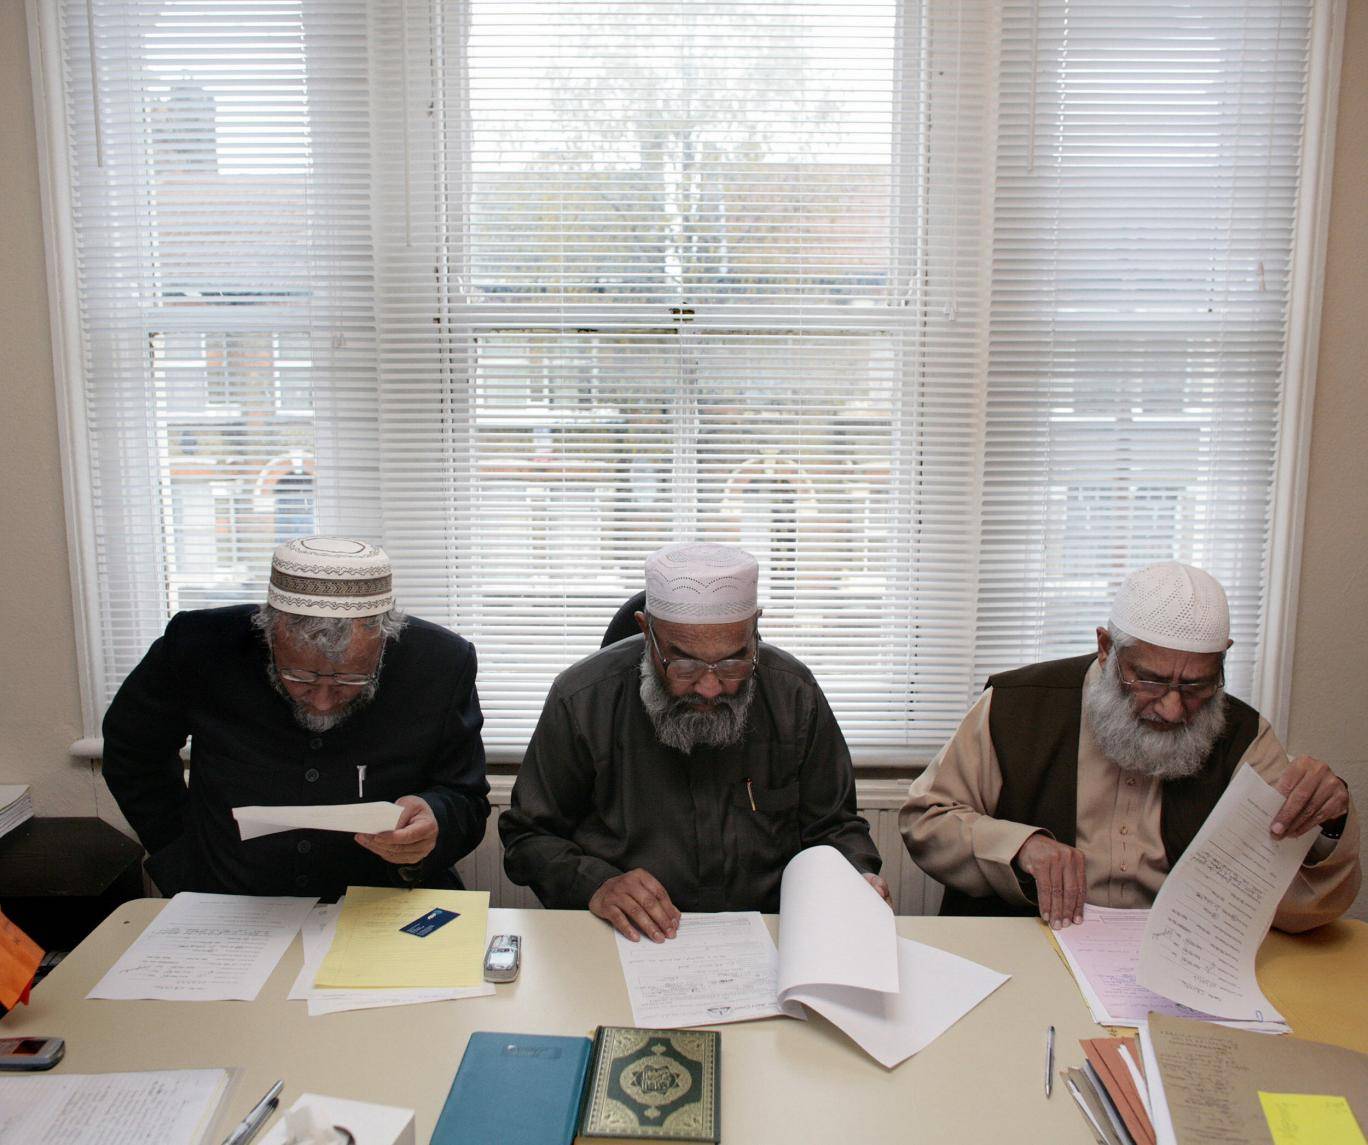 Sharia marriages should be registered under UK law, says independent review